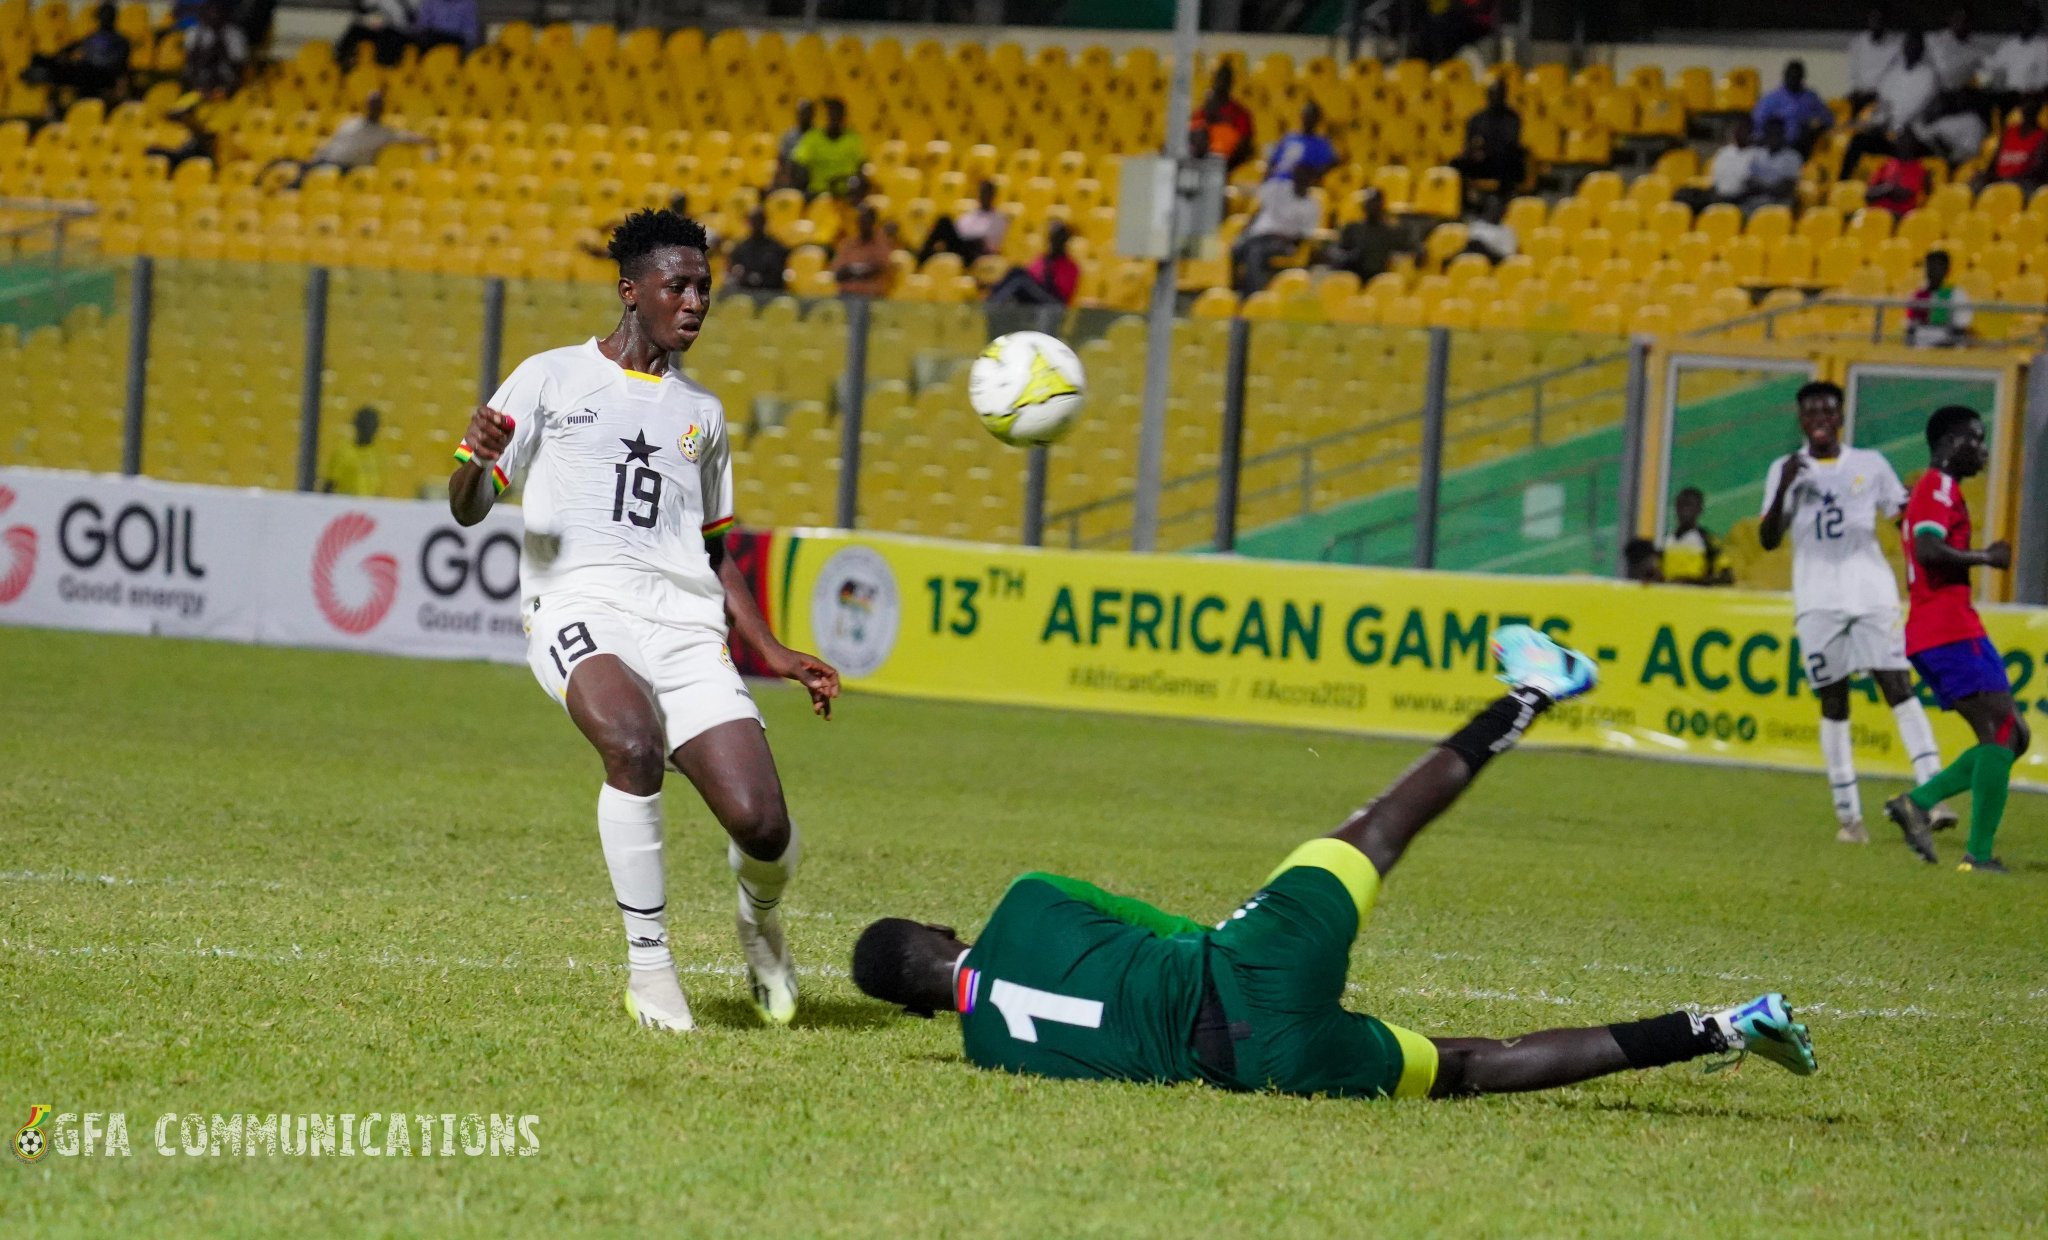 13th African Games: Ghana defeat Gambia 3-1 in Accra